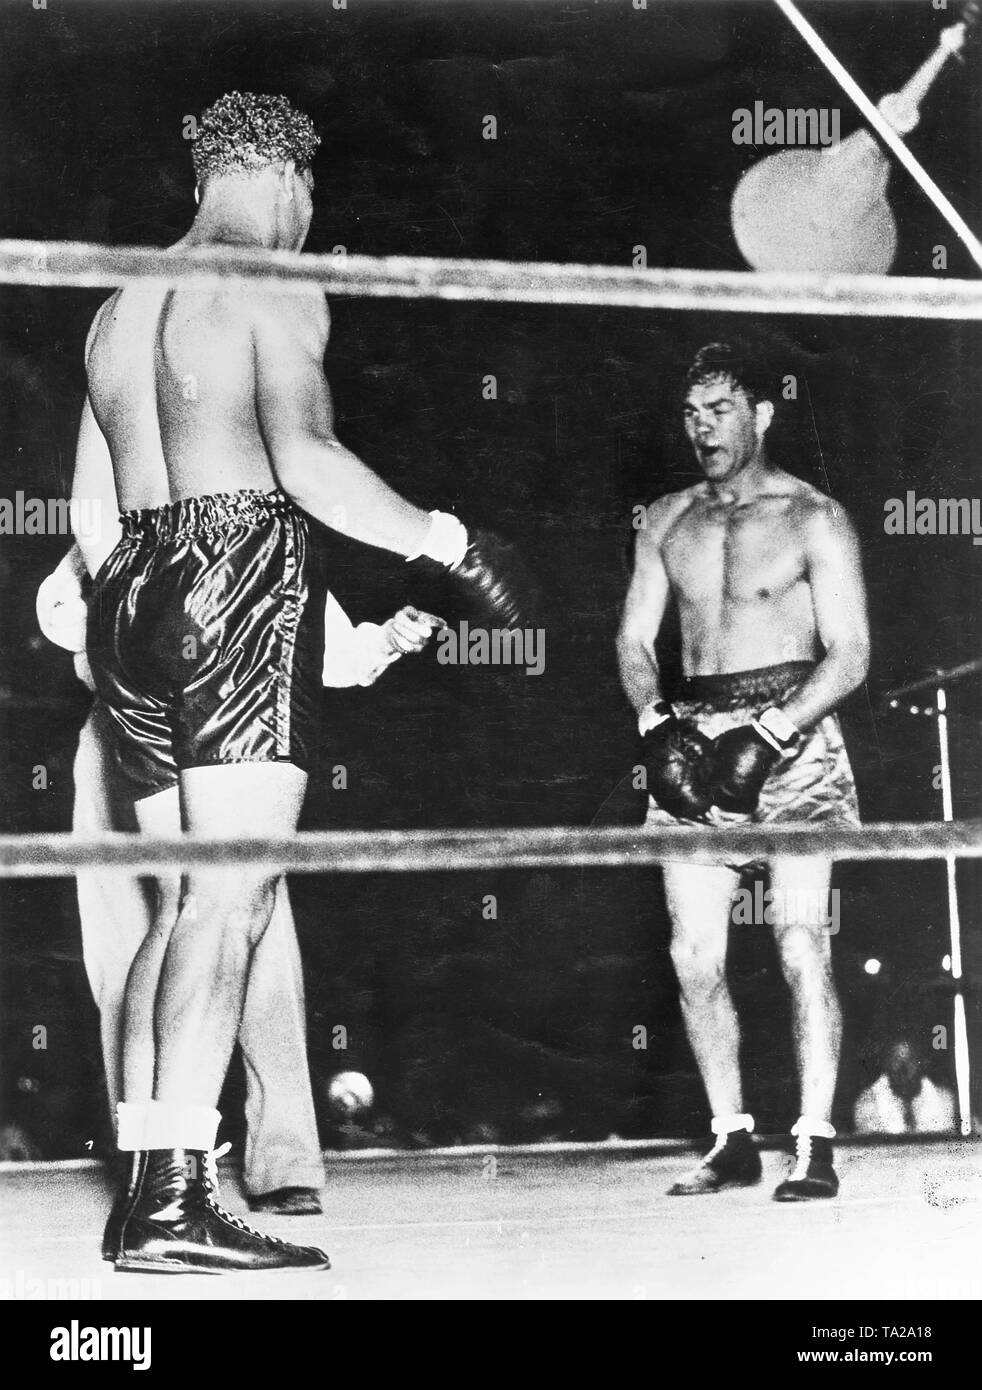 German boxer Max Schmeling (on the right) against the American Joe Louis at the championship match in the Yankee Stadium in New York on June 19. 1936. Scene from the Tobis documentary film 'A German victory' (Ein deutscher Sieg) Stock Photo